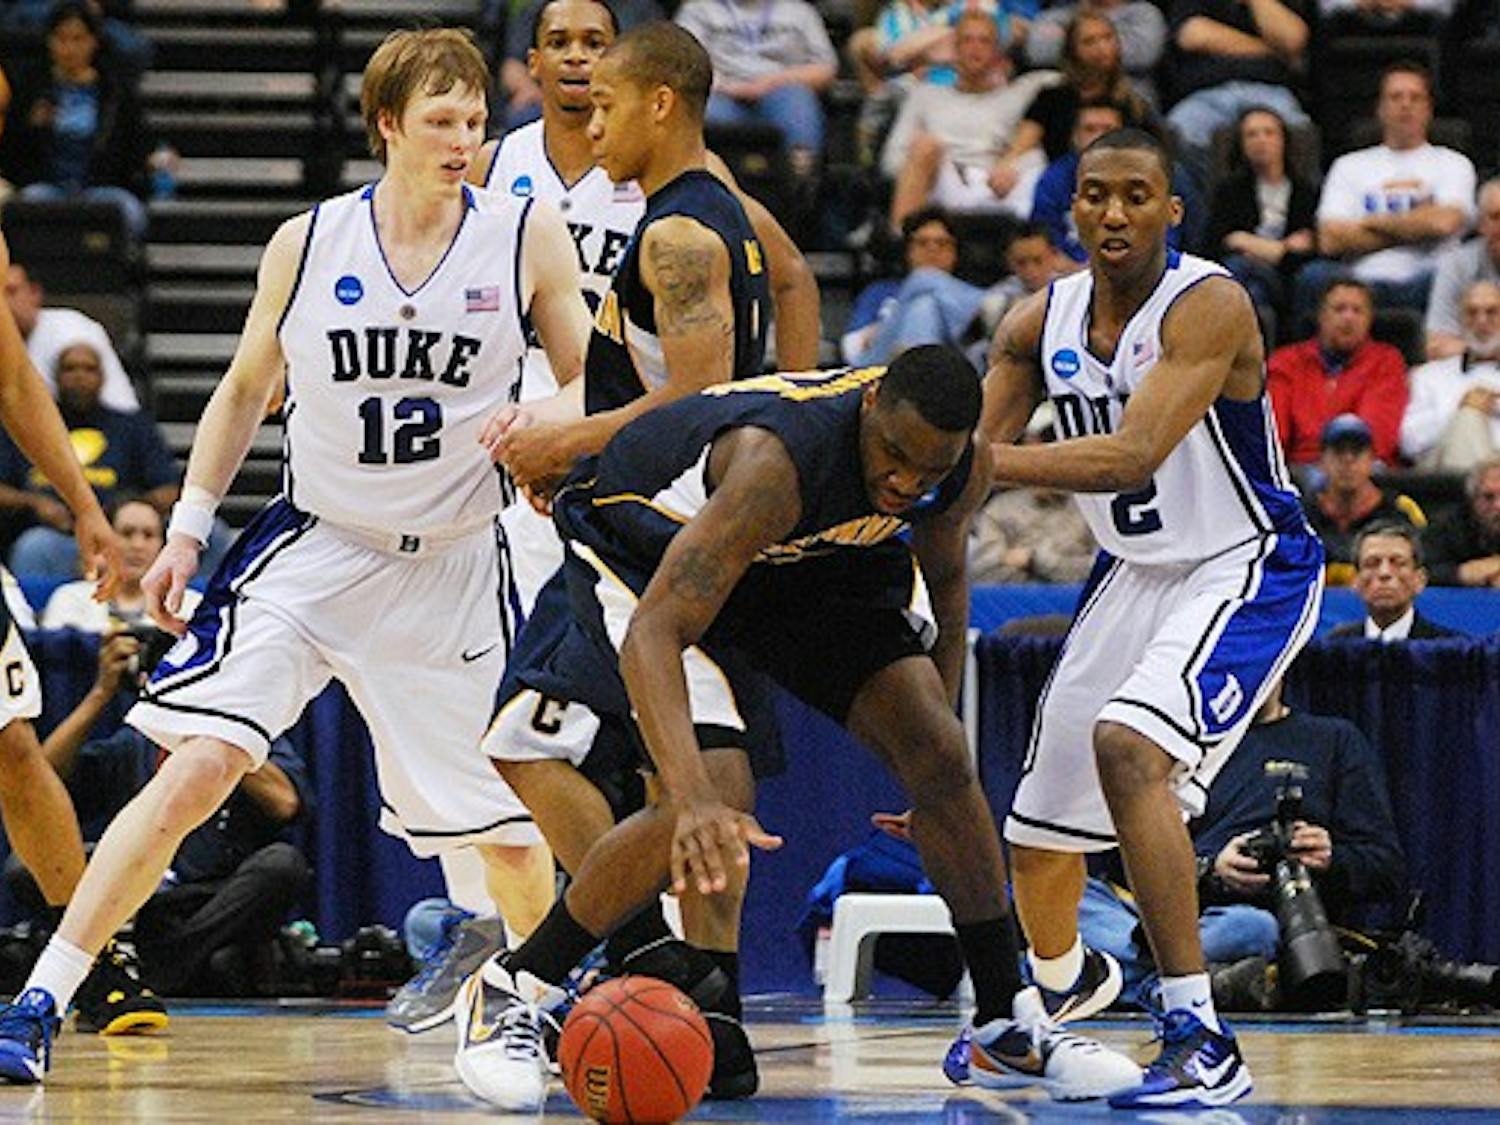 Kyle Singler and Nolan Smith have grown from highly recruited freshmen to Duke’s indisputed leaders.